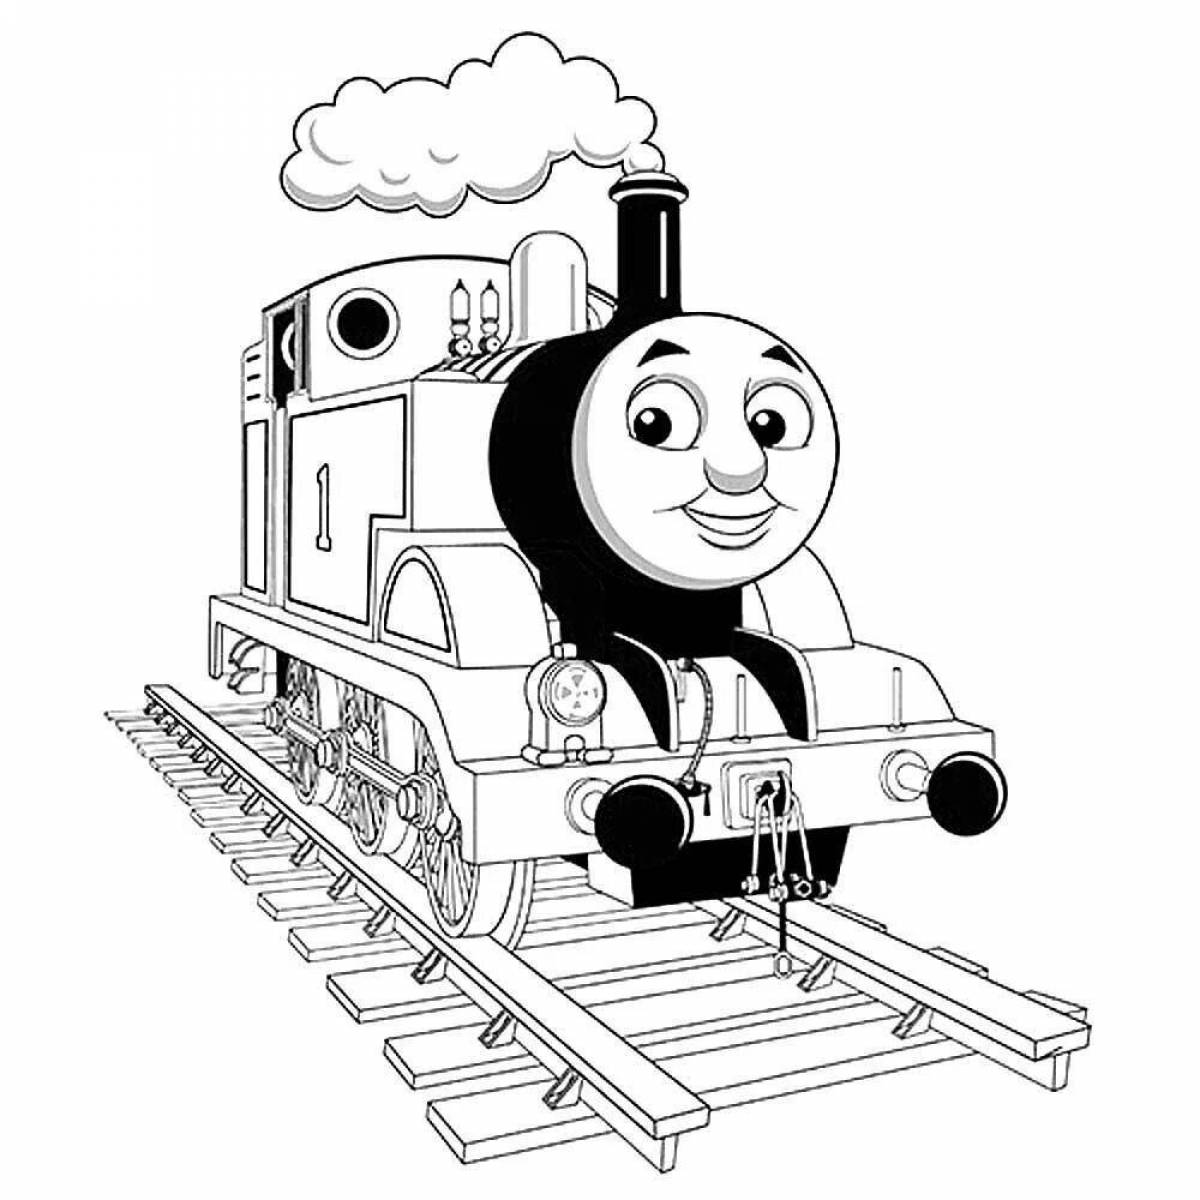 Lively thomas the tank engine coloring